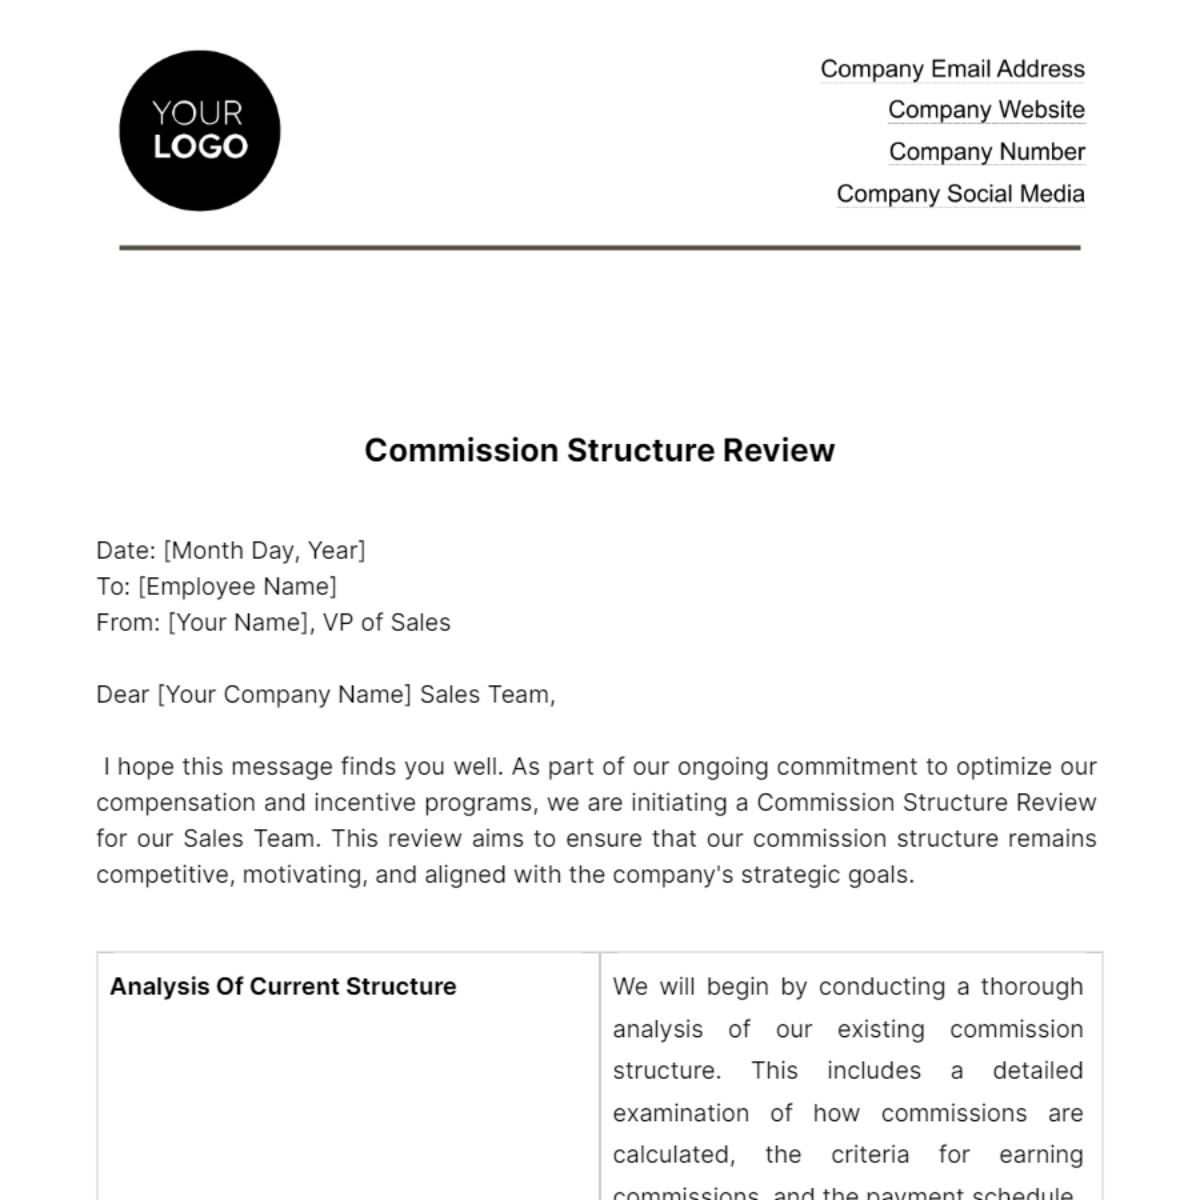 Free Commission Structure Review HR Template